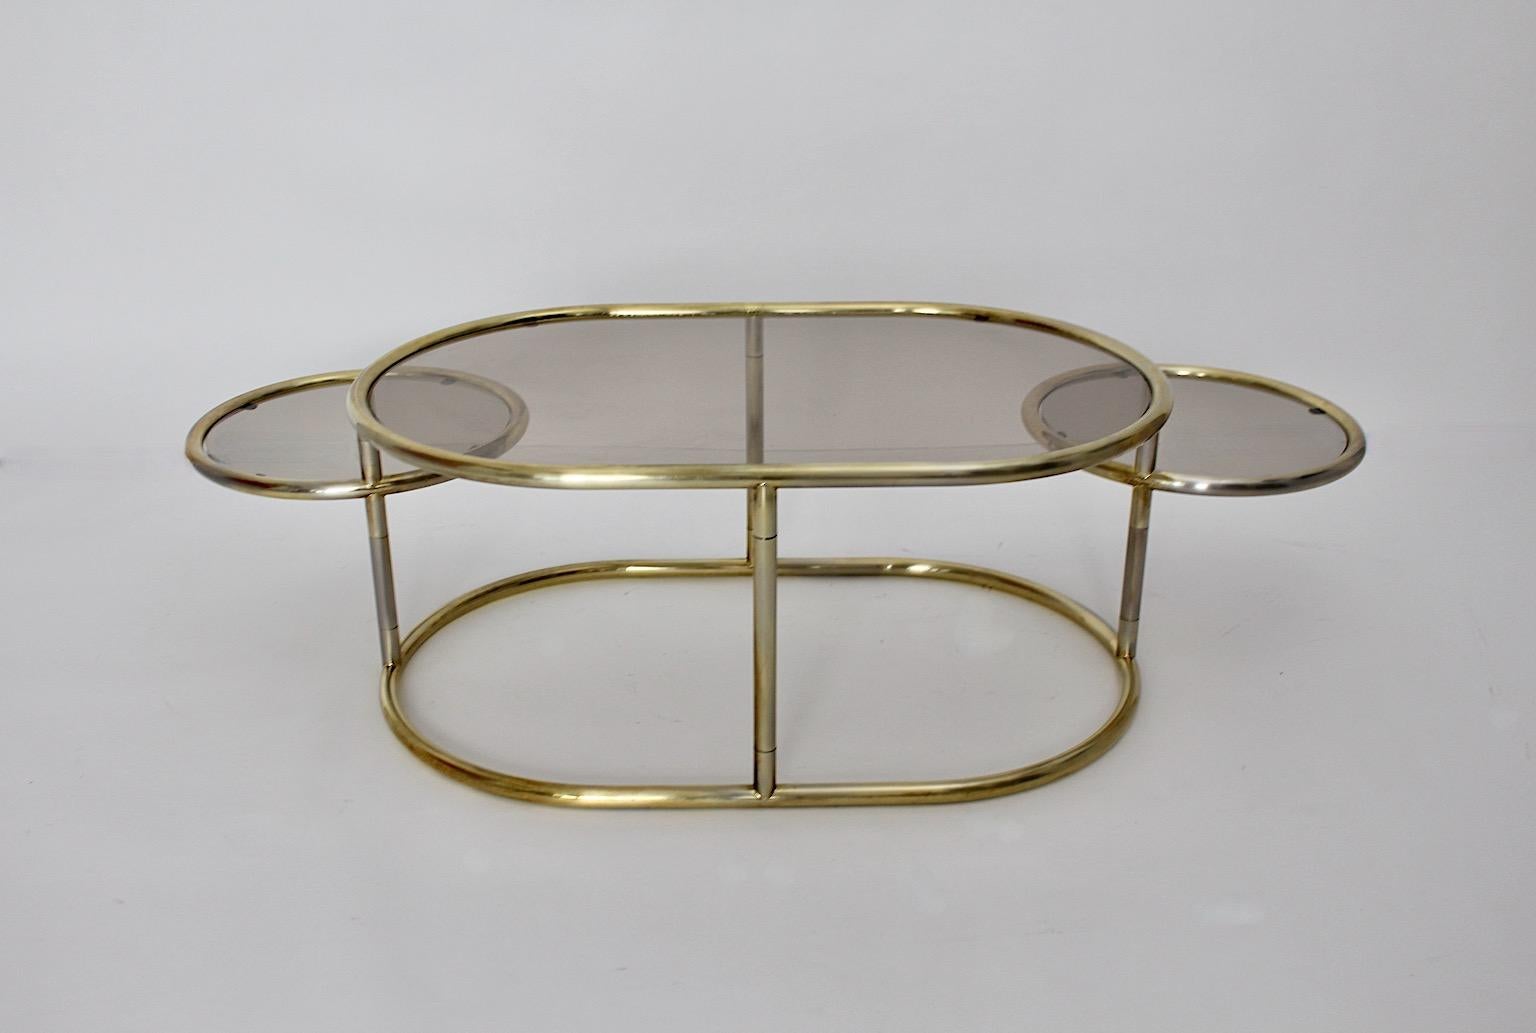 Space Age Modernist Vintage Golden Metal Glass Oval Coffee Table Sofa Table, 1960s, Italy For Sale